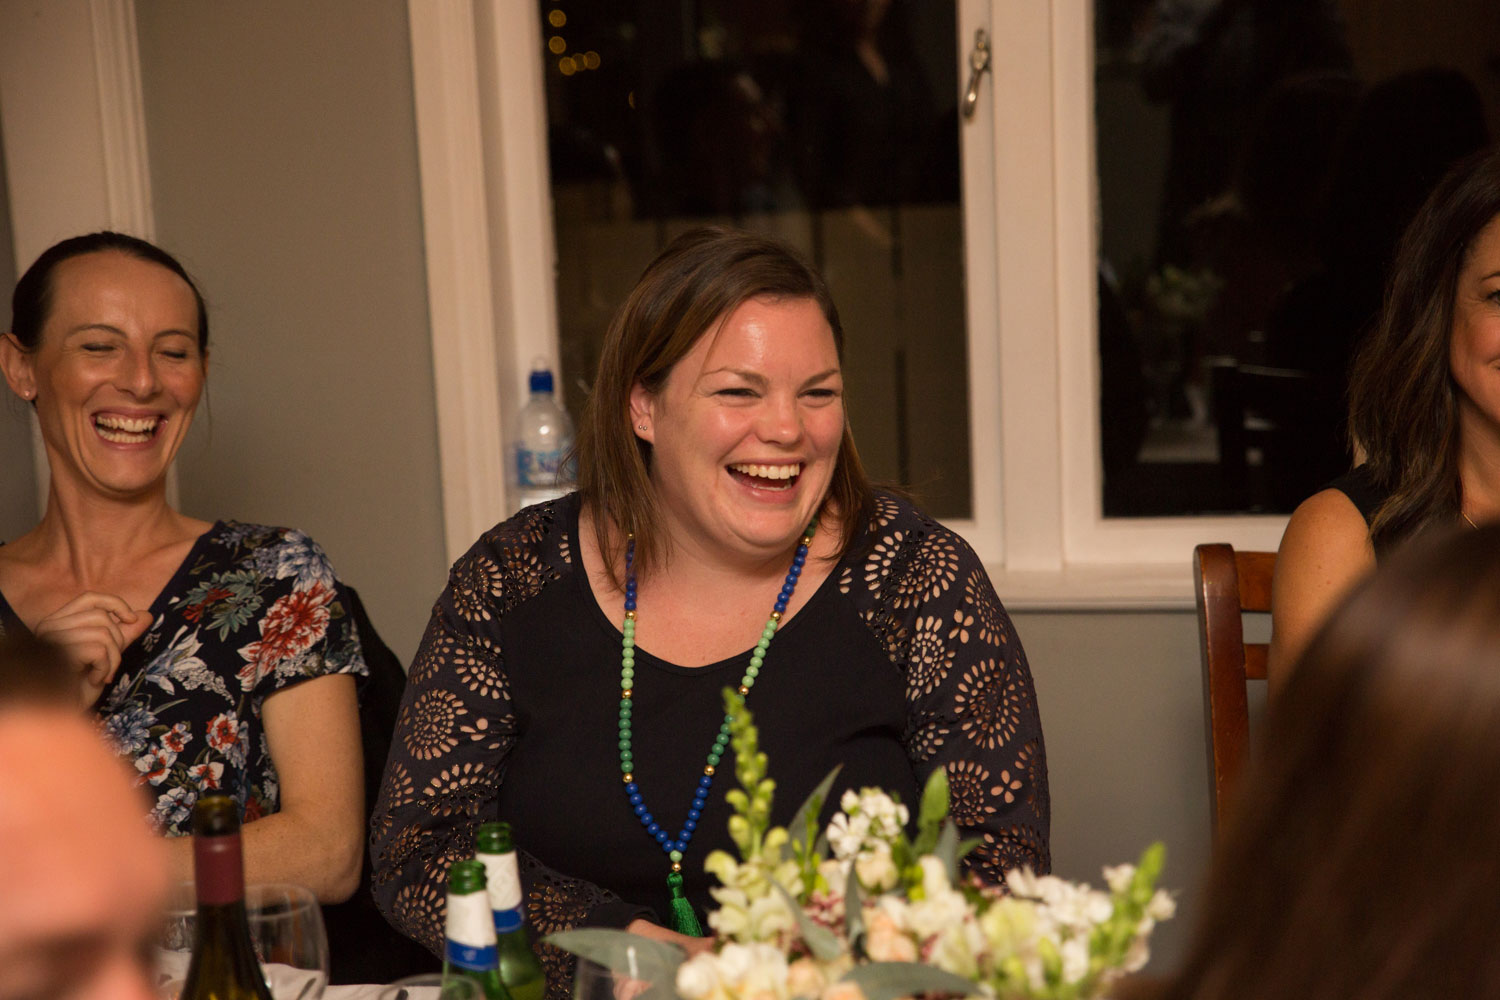 wedding photographer auckland guest laughing at joke